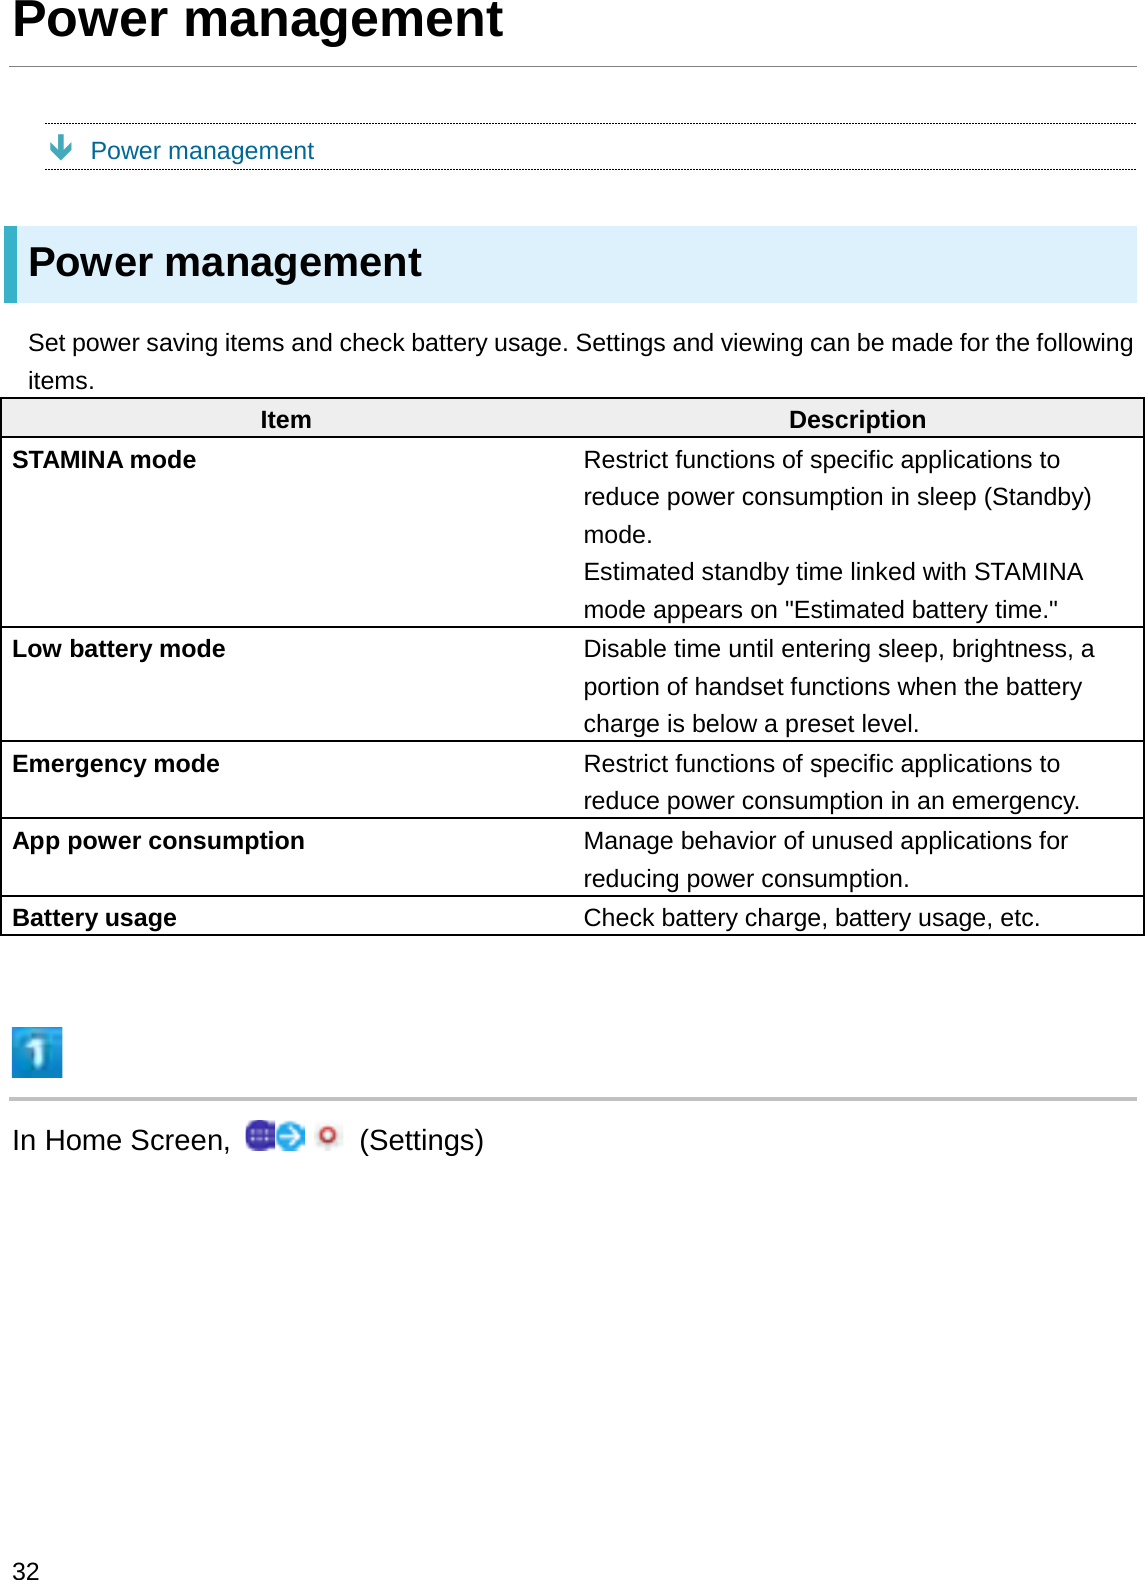 Power managementÐPower managementPower managementSet power saving items and check battery usage. Settings and viewing can be made for the following items.Item DescriptionSTAMINA mode Restrict functions of specific applications to reduce power consumption in sleep (Standby) mode.Estimated standby time linked with STAMINA mode appears on &quot;Estimated battery time.&quot;Low battery mode Disable time until entering sleep, brightness, a portion of handset functions when the battery charge is below a preset level.Emergency mode Restrict functions of specific applications to reduce power consumption in an emergency.App power consumption Manage behavior of unused applications for reducing power consumption.Battery usage Check battery charge, battery usage, etc.In Home Screen,  (Settings)32